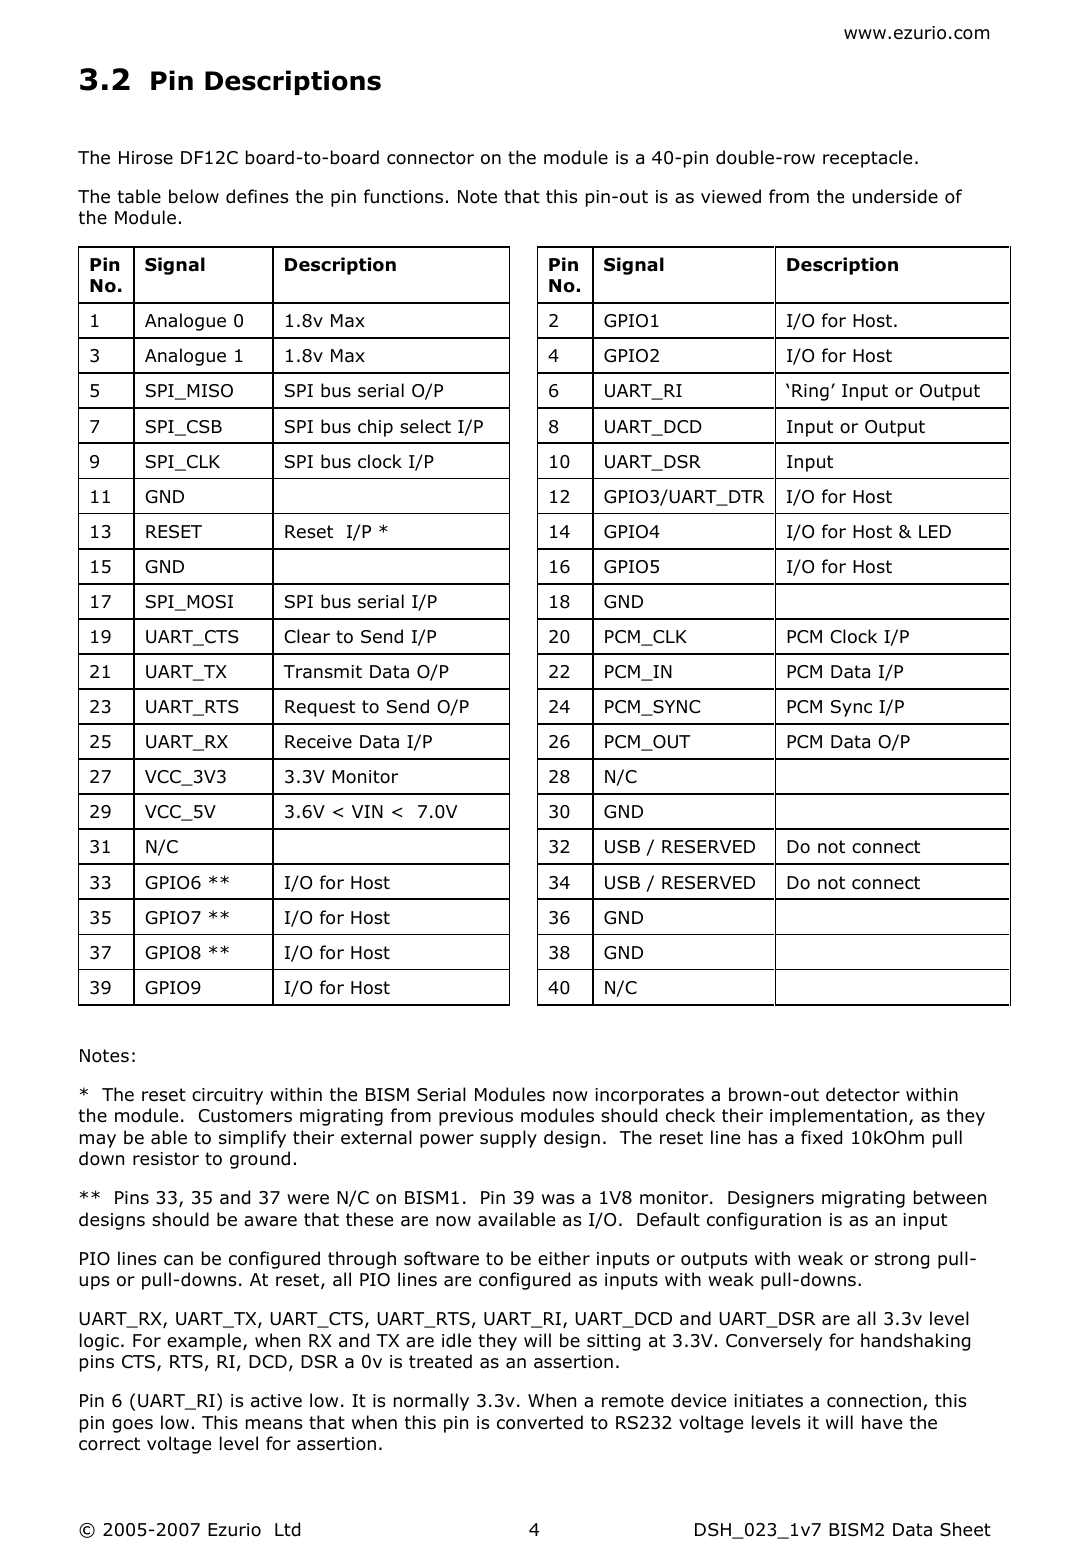 www.ezurio.com © 2005-2007 Ezurio  Ltd  DSH_023_1v7 BISM2 Data Sheet  4 3.2 Pin Descriptions  The Hirose DF12C board-to-board connector on the module is a 40-pin double-row receptacle.  The table below defines the pin functions. Note that this pin-out is as viewed from the underside of the Module.  Pin No. Signal  Description    Pin No. Signal  Description 1  Analogue 0  1.8v Max    2  GPIO1  I/O for Host. 3  Analogue 1  1.8v Max    4  GPIO2  I/O for Host 5  SPI_MISO  SPI bus serial O/P    6  UART_RI  ‘Ring’ Input or Output 7  SPI_CSB  SPI bus chip select I/P    8  UART_DCD  Input or Output  9  SPI_CLK  SPI bus clock I/P    10  UART_DSR  Input  11  GND      12  GPIO3/UART_DTR I/O for Host 13  RESET  Reset  I/P *    14  GPIO4  I/O for Host &amp; LED 15  GND      16  GPIO5  I/O for Host 17  SPI_MOSI  SPI bus serial I/P    18  GND   19  UART_CTS  Clear to Send I/P    20  PCM_CLK  PCM Clock I/P 21  UART_TX  Transmit Data O/P    22  PCM_IN  PCM Data I/P 23  UART_RTS  Request to Send O/P    24  PCM_SYNC  PCM Sync I/P 25  UART_RX  Receive Data I/P    26  PCM_OUT  PCM Data O/P 27  VCC_3V3  3.3V Monitor    28  N/C   29  VCC_5V  3.6V &lt; VIN &lt;  7.0V    30  GND   31  N/C      32  USB / RESERVED  Do not connect 33  GPIO6 **  I/O for Host    34  USB / RESERVED  Do not connect 35  GPIO7 **  I/O for Host    36  GND   37  GPIO8 **  I/O for Host    38  GND   39  GPIO9  I/O for Host    40  N/C    Notes: *  The reset circuitry within the BISM Serial Modules now incorporates a brown-out detector within the module.  Customers migrating from previous modules should check their implementation, as they may be able to simplify their external power supply design.  The reset line has a fixed 10kOhm pull down resistor to ground. **  Pins 33, 35 and 37 were N/C on BISM1.  Pin 39 was a 1V8 monitor.  Designers migrating between designs should be aware that these are now available as I/O.  Default configuration is as an input PIO lines can be configured through software to be either inputs or outputs with weak or strong pull-ups or pull-downs. At reset, all PIO lines are configured as inputs with weak pull-downs. UART_RX, UART_TX, UART_CTS, UART_RTS, UART_RI, UART_DCD and UART_DSR are all 3.3v level logic. For example, when RX and TX are idle they will be sitting at 3.3V. Conversely for handshaking pins CTS, RTS, RI, DCD, DSR a 0v is treated as an assertion. Pin 6 (UART_RI) is active low. It is normally 3.3v. When a remote device initiates a connection, this pin goes low. This means that when this pin is converted to RS232 voltage levels it will have the correct voltage level for assertion. 